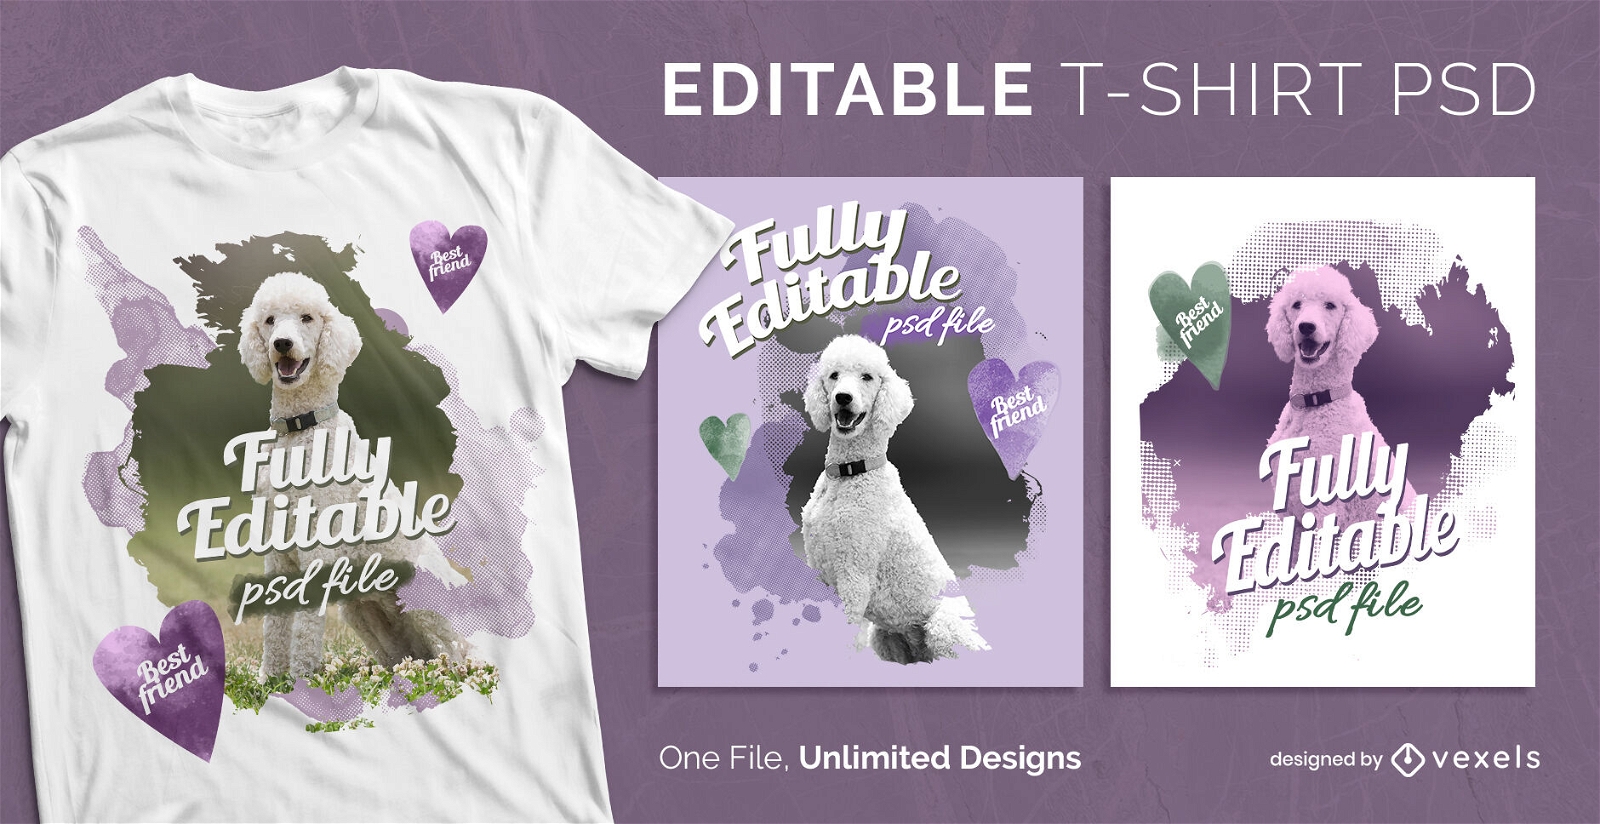 Dogs in watercolor scalable t-shirt psd